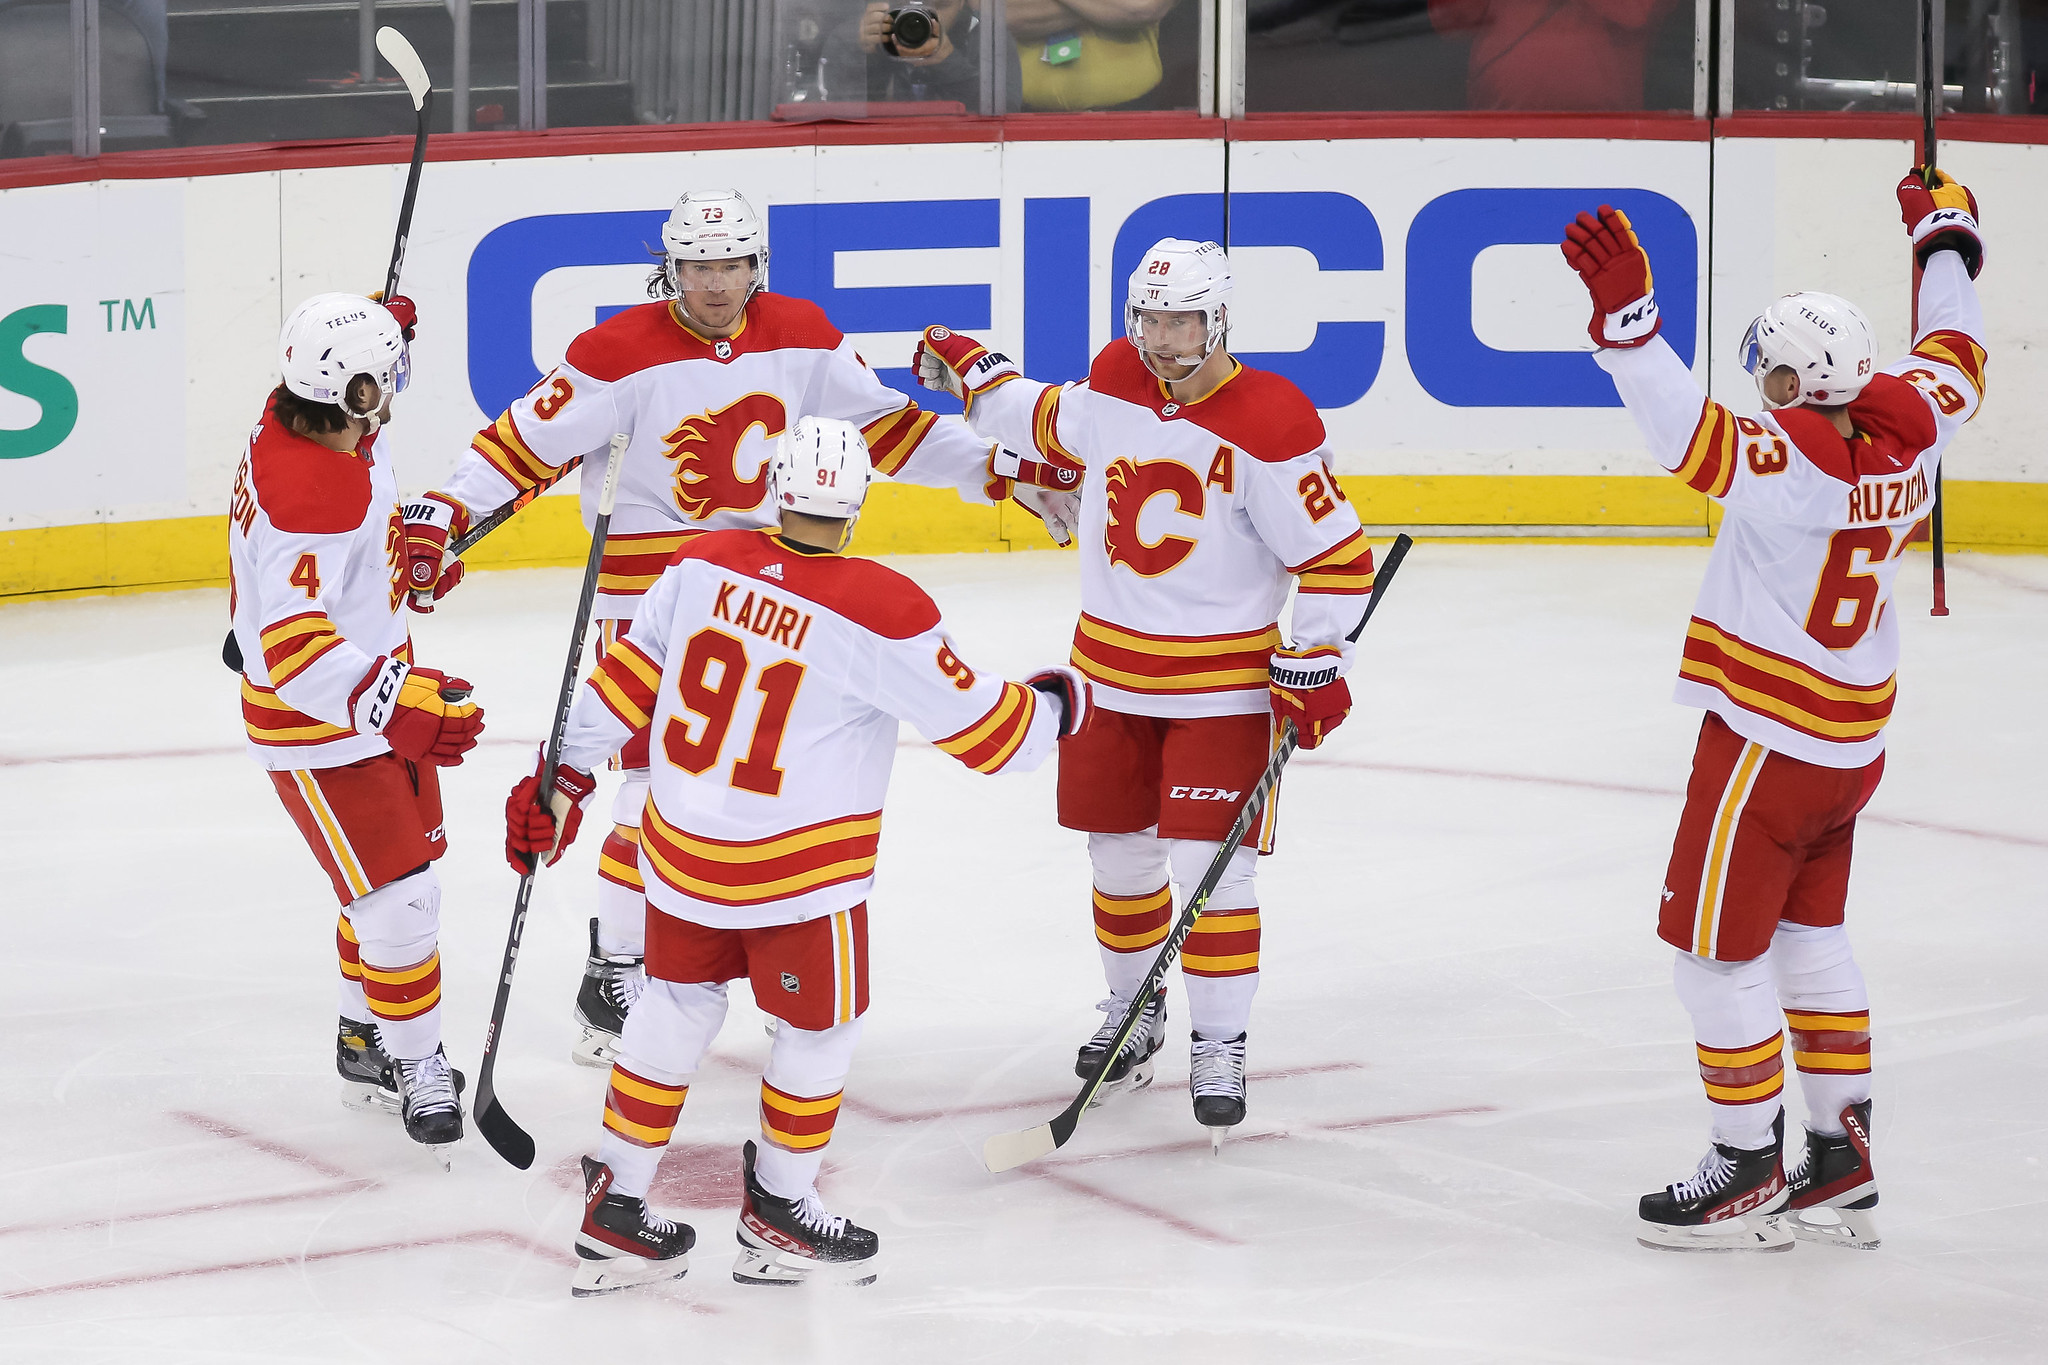 Friday Flames Notebook: Did the Hockey Gods punish the Flames? - The Win  Column